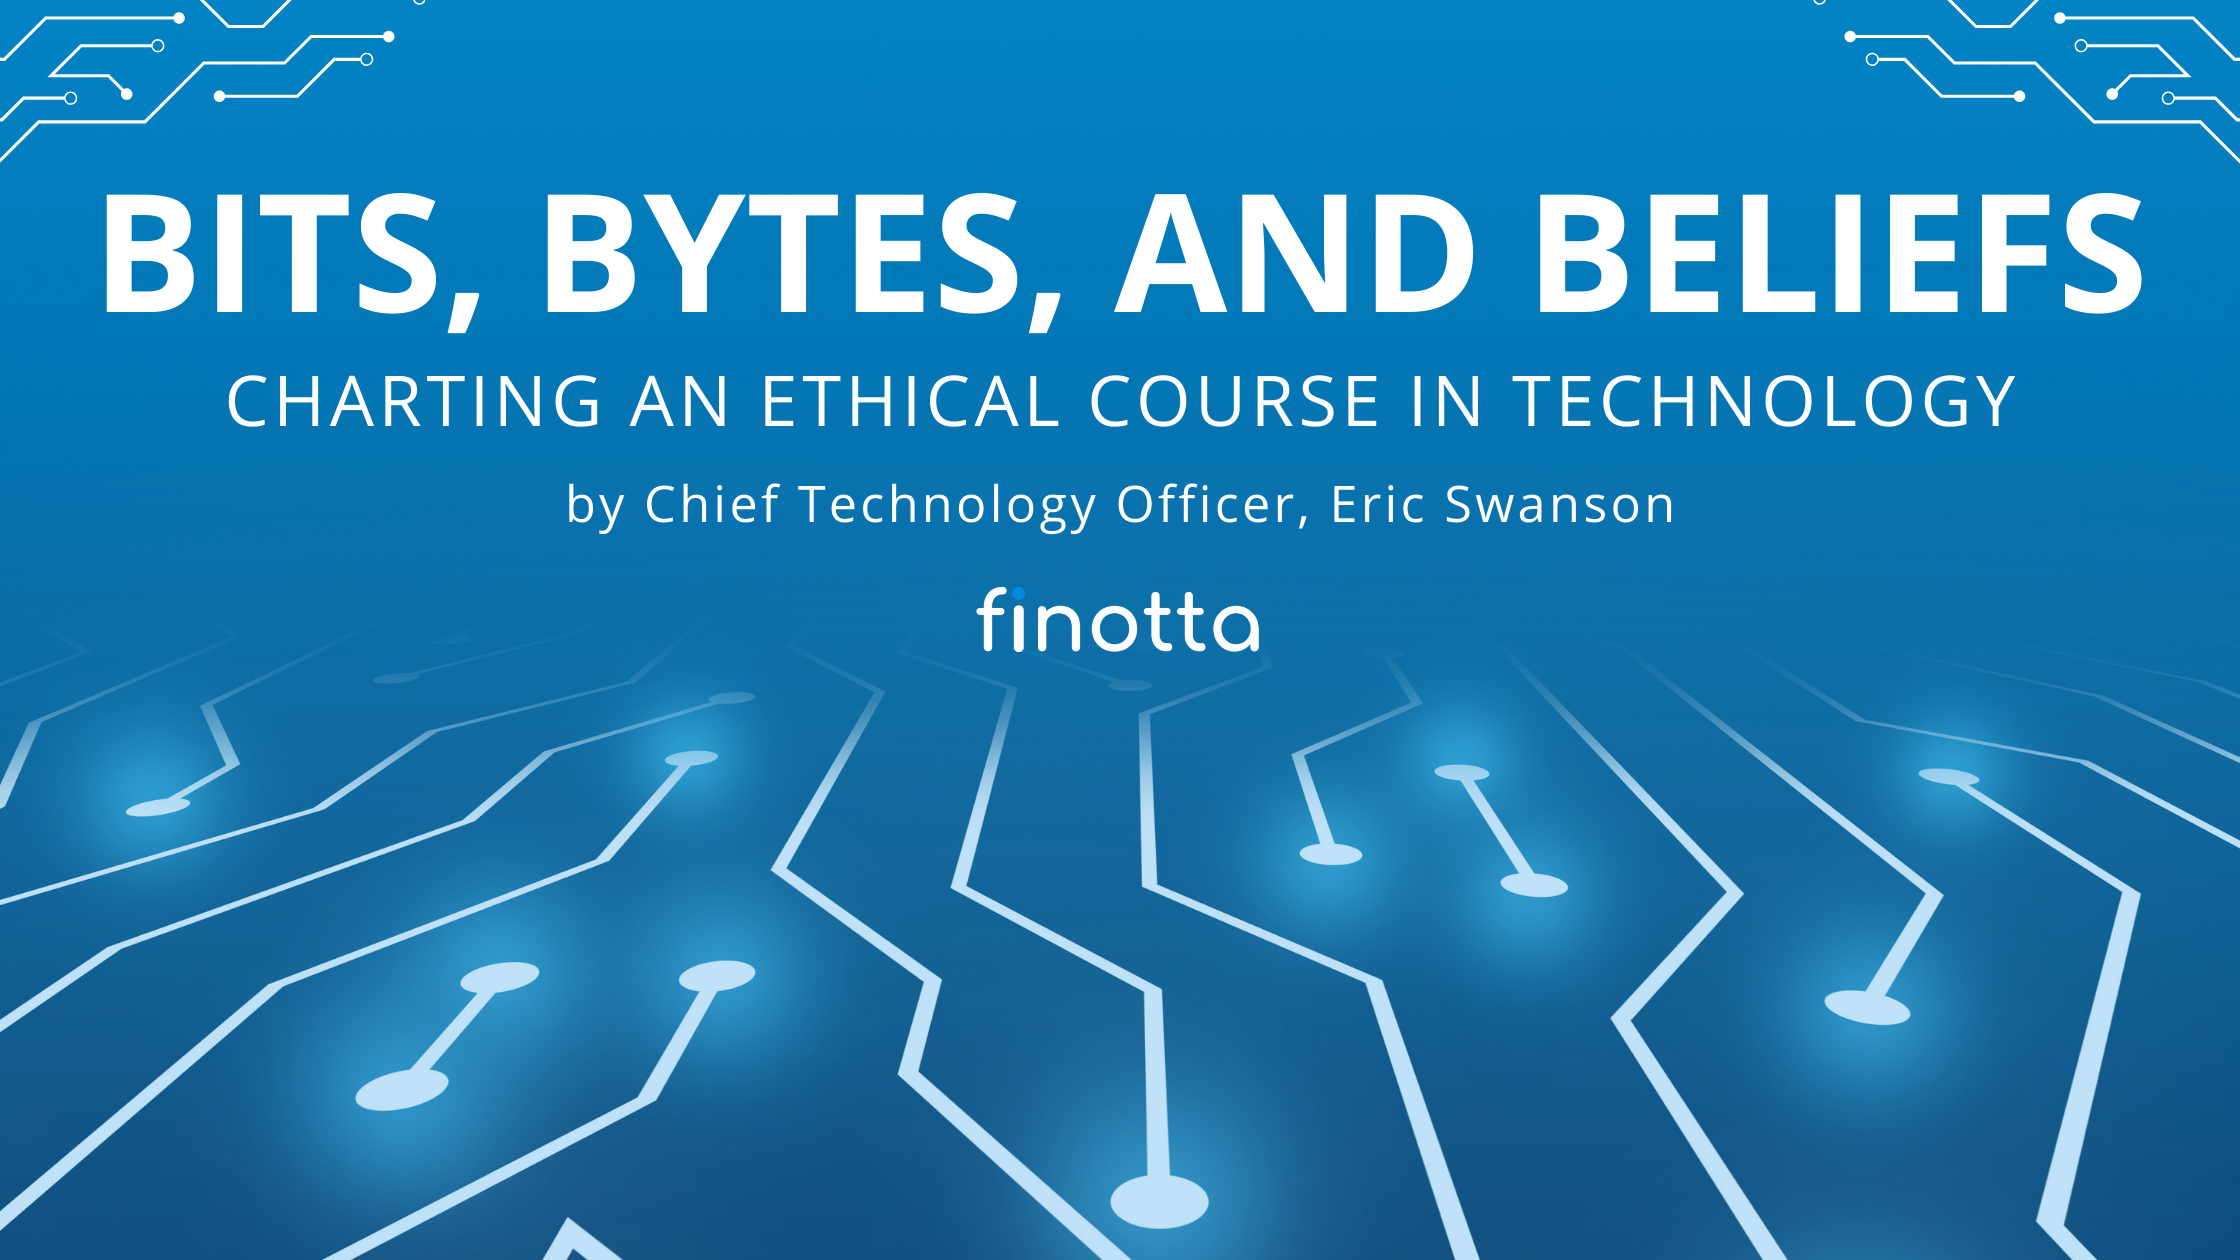 Bits, Bytes, and Beliefs: Charting an Ethical Course in Technology